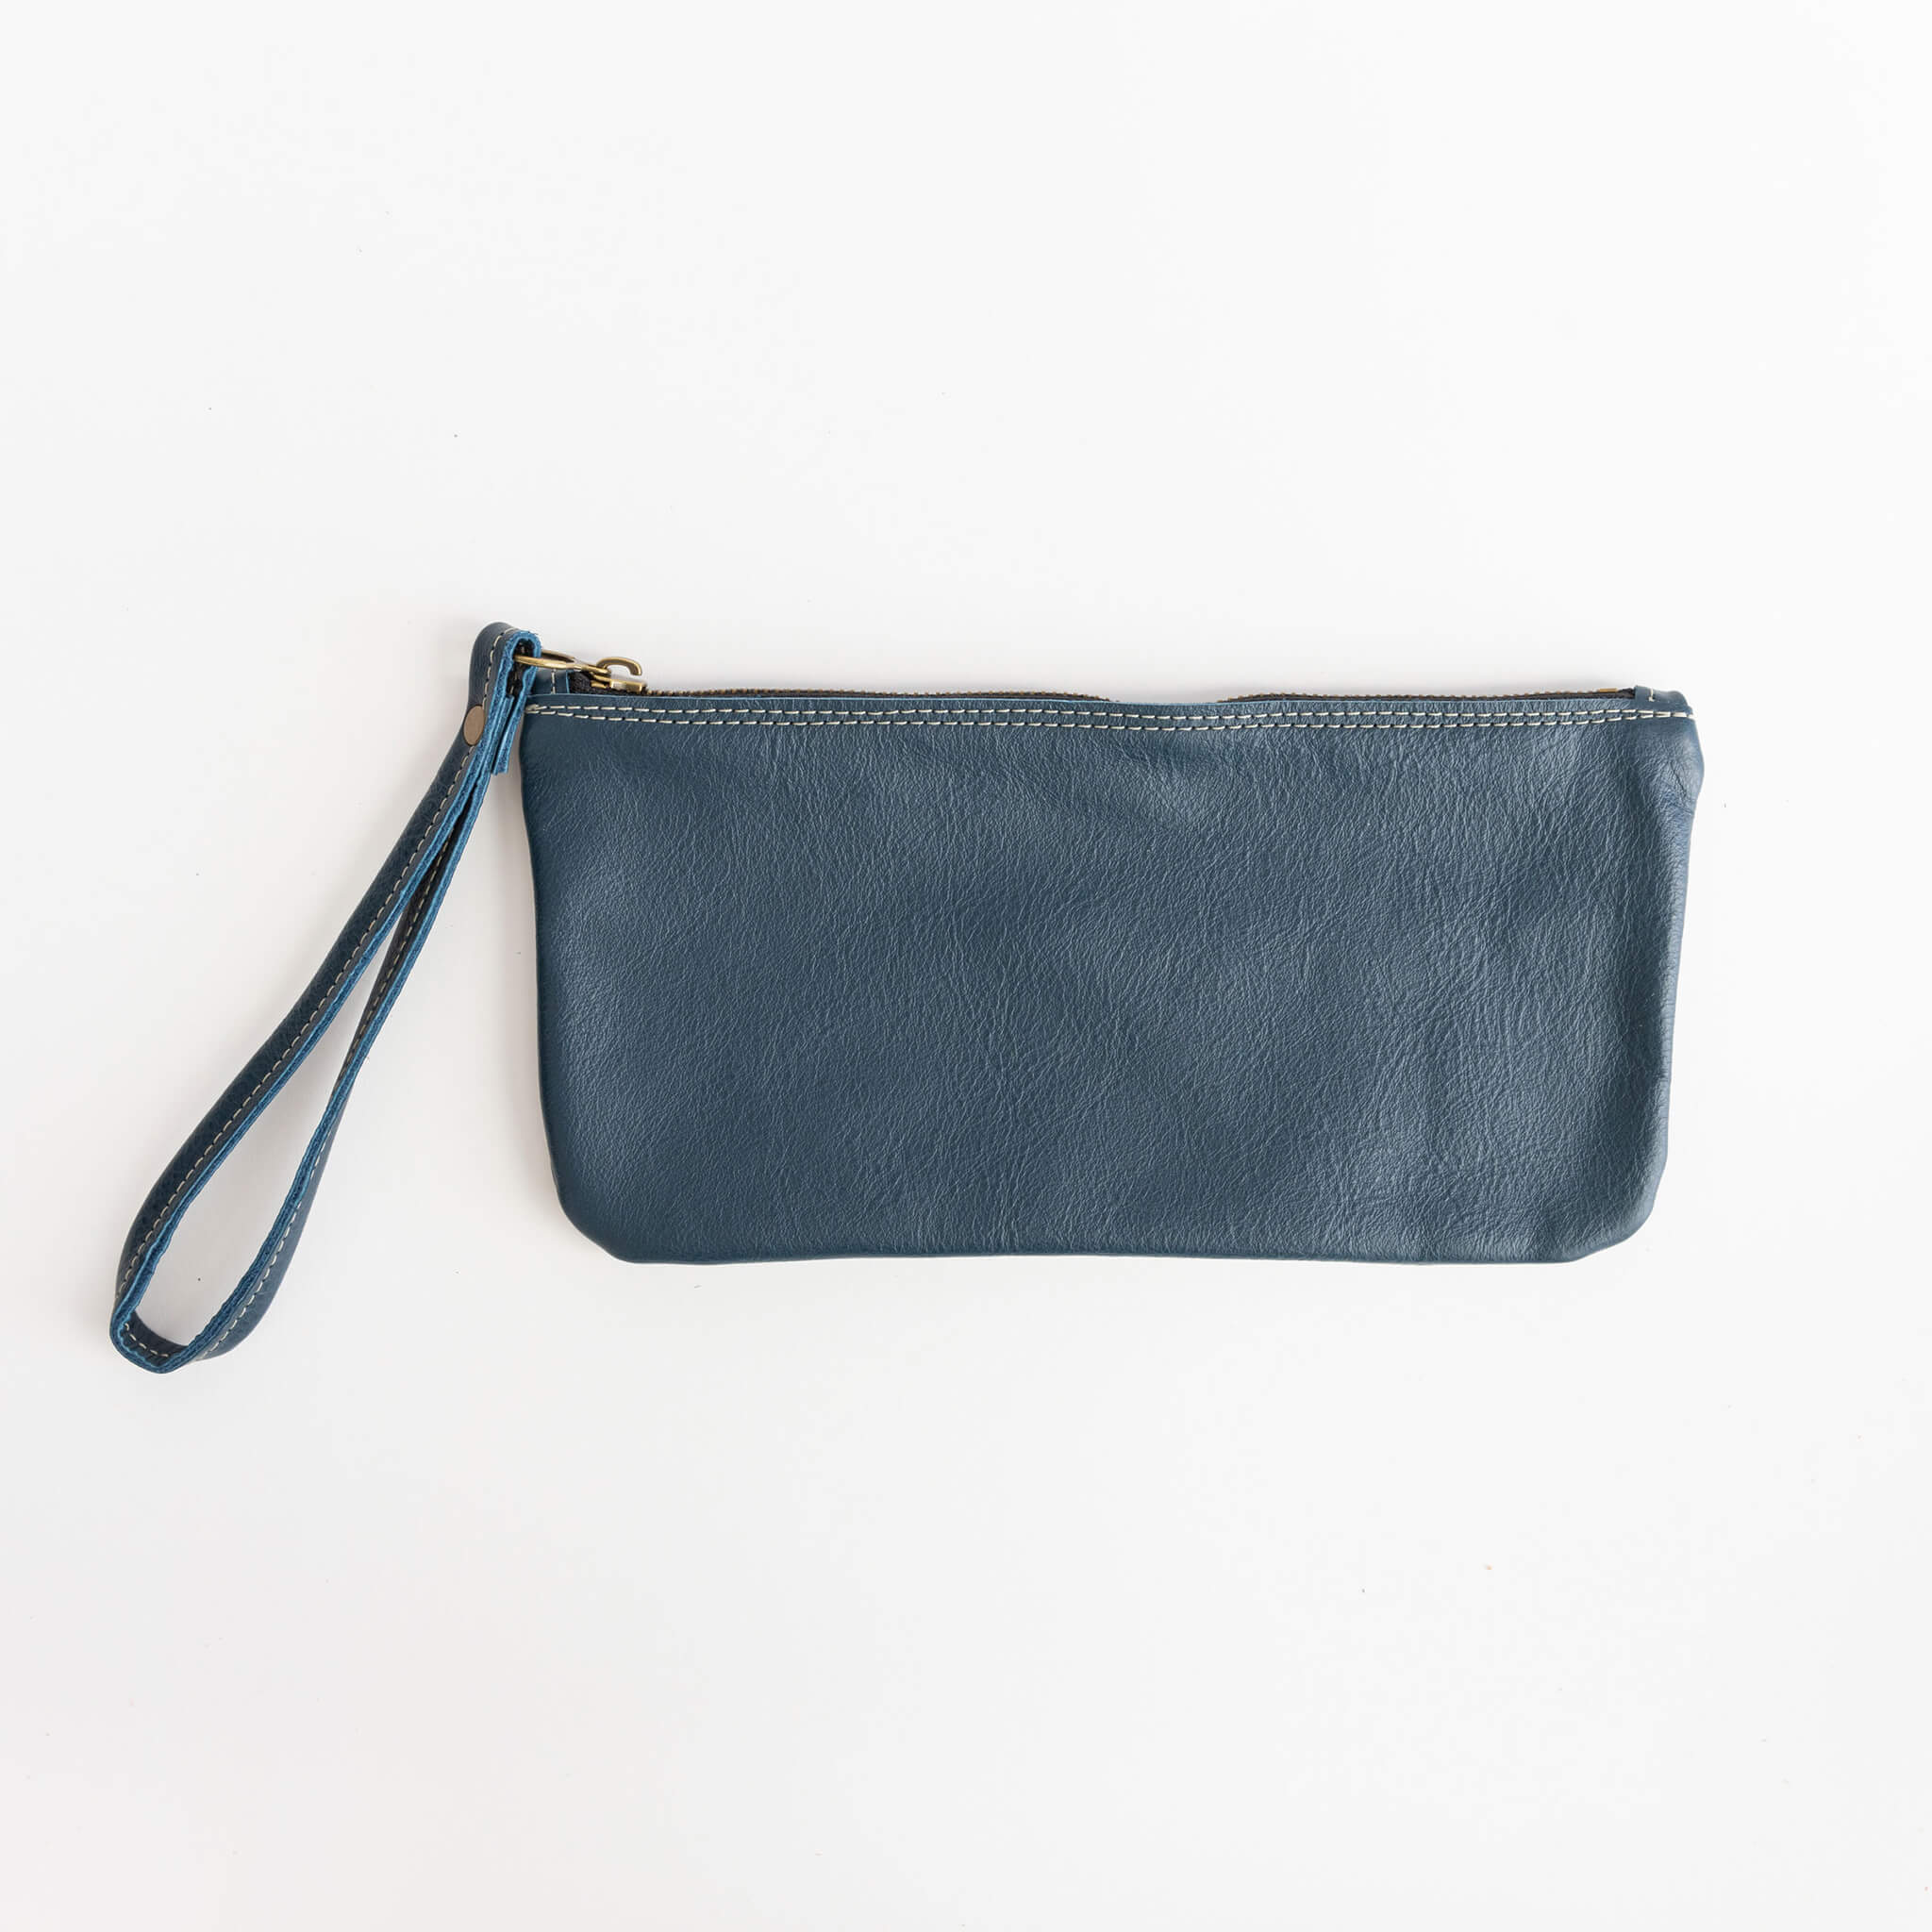 francis clutch - wristlet - handmade leather - midnight front view